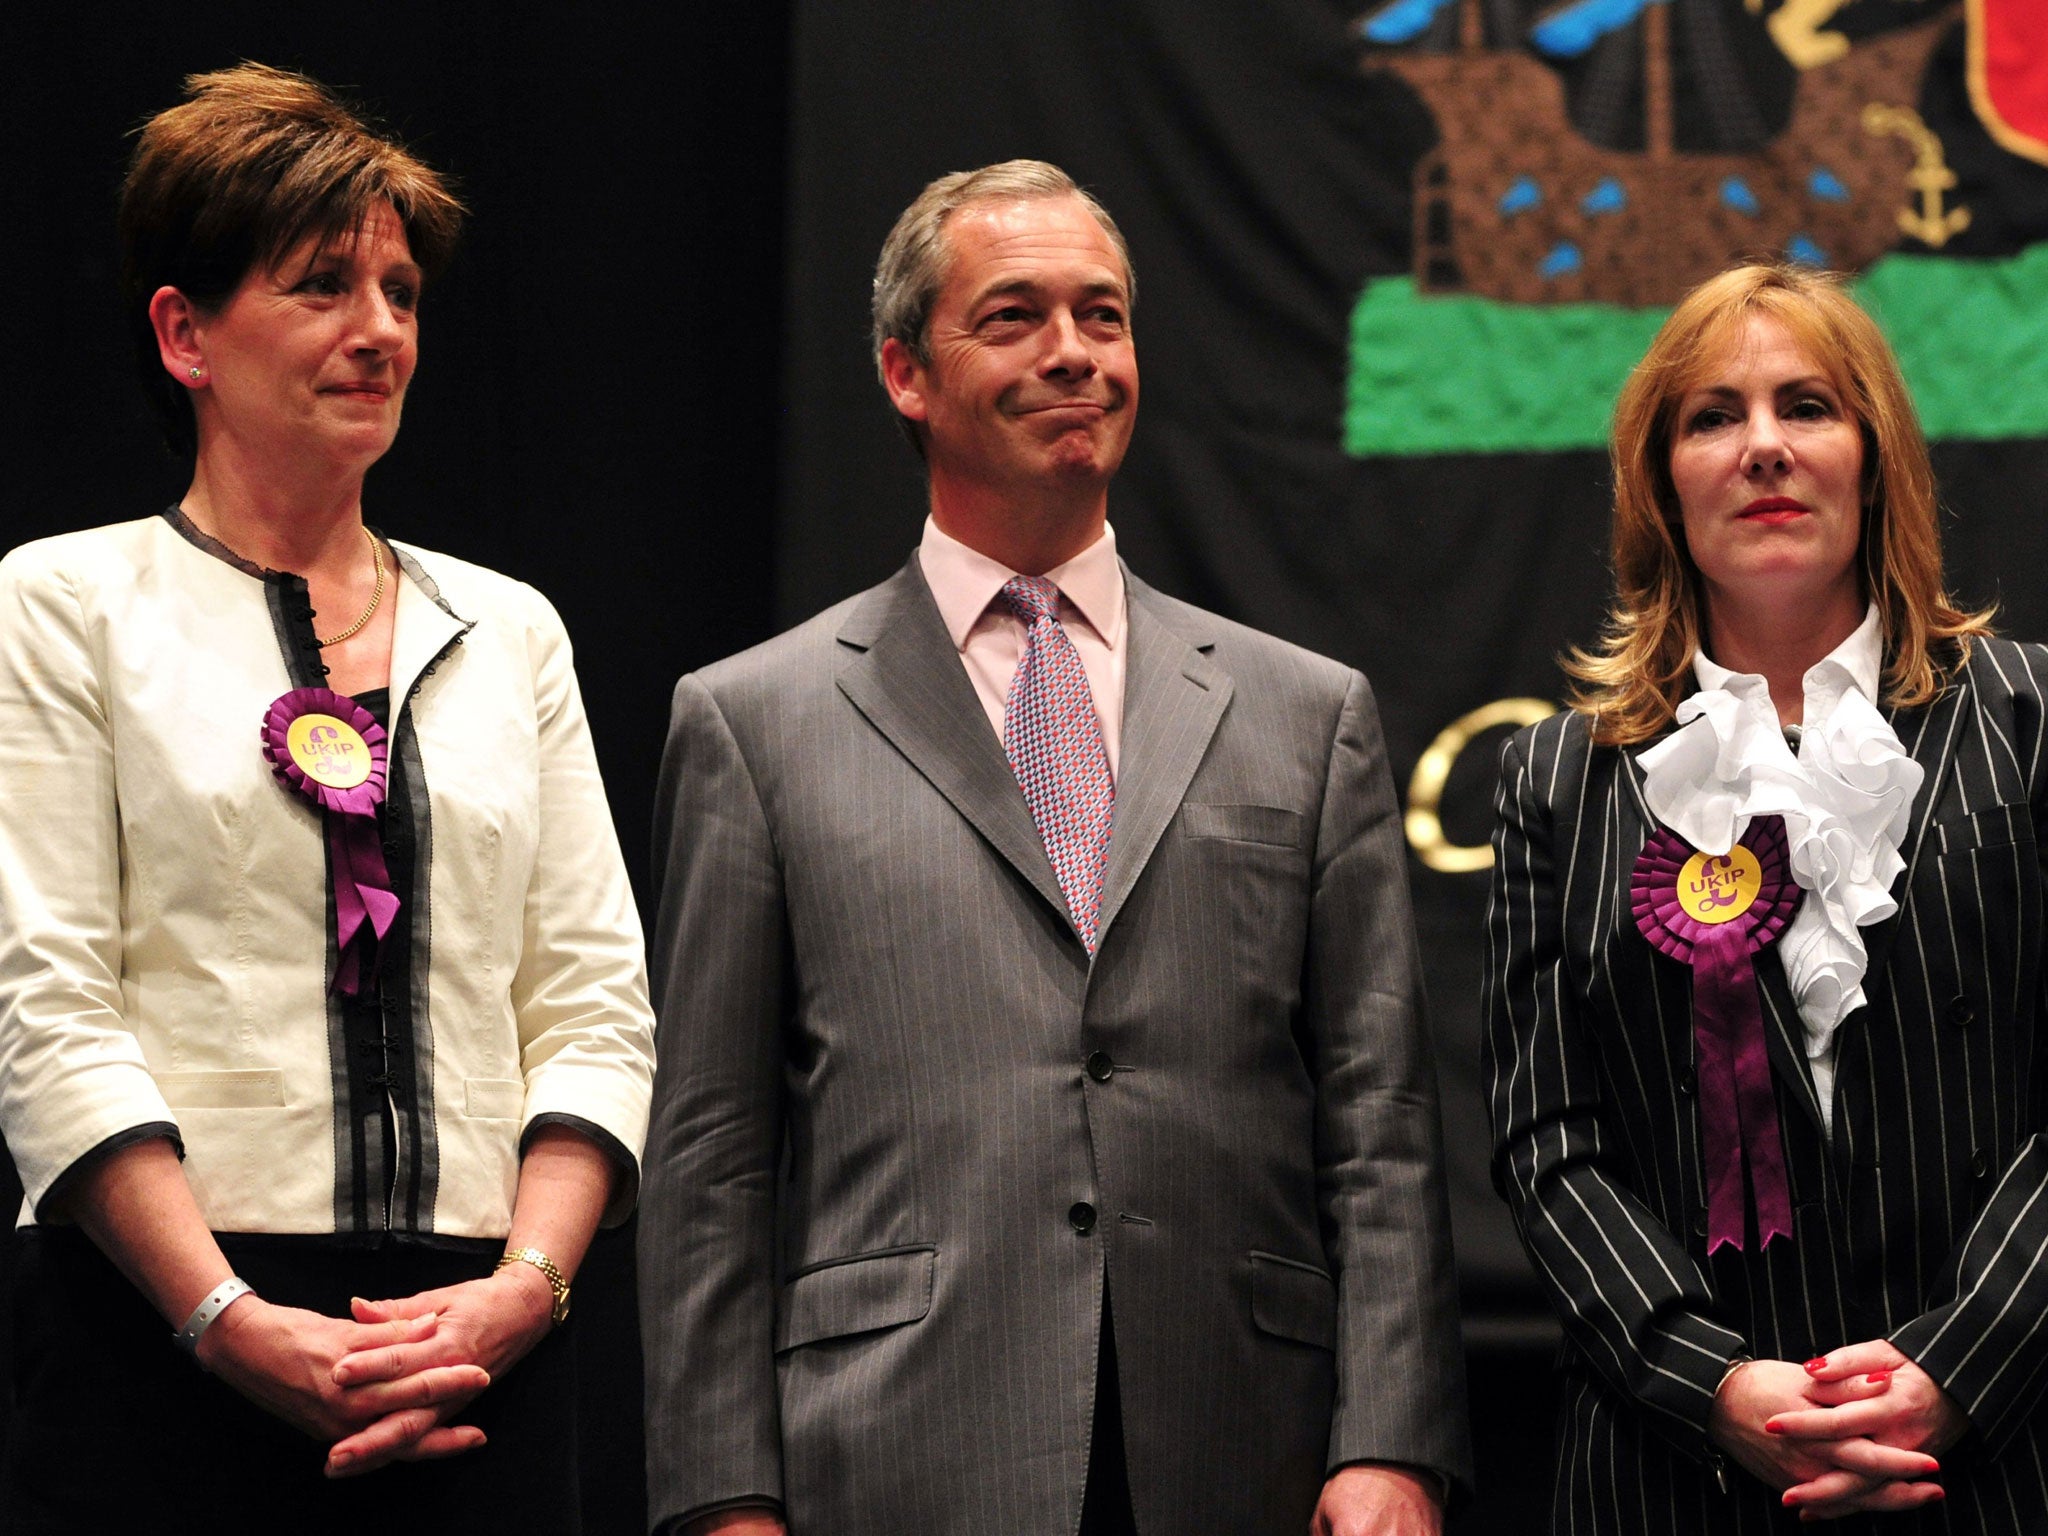 Nigel Farage flanked by fellow Ukip MEPs Janice Atkinson (R) and Diane James (L)